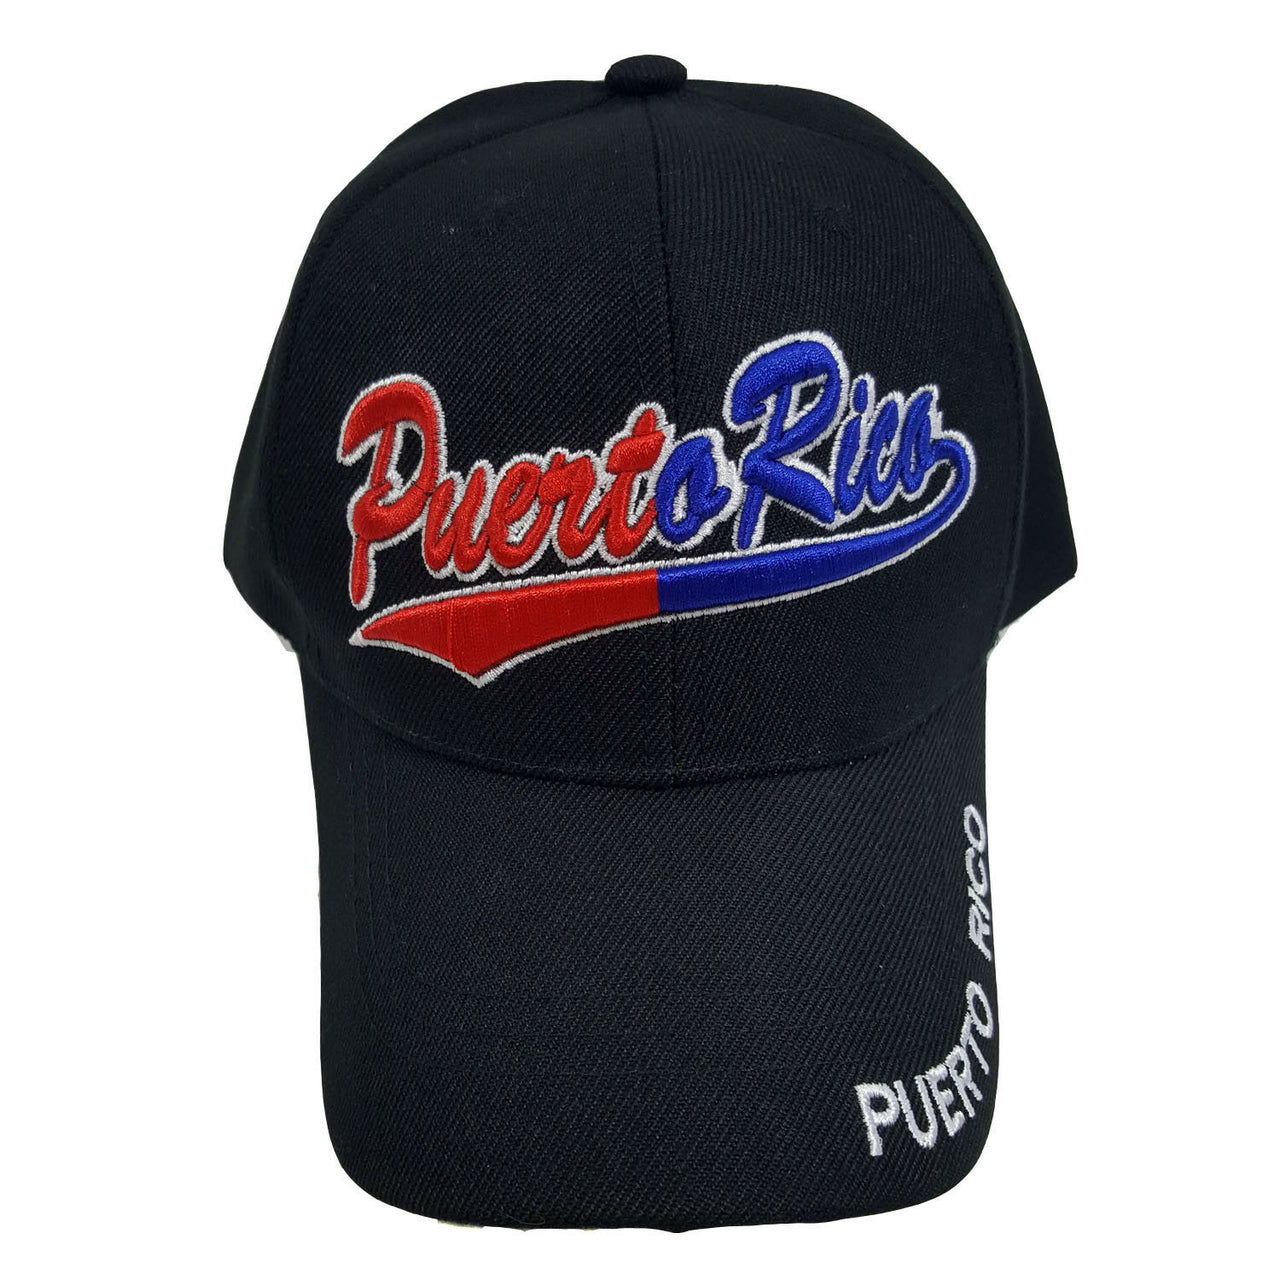 Puerto Rico Two-Color Baseball Hat